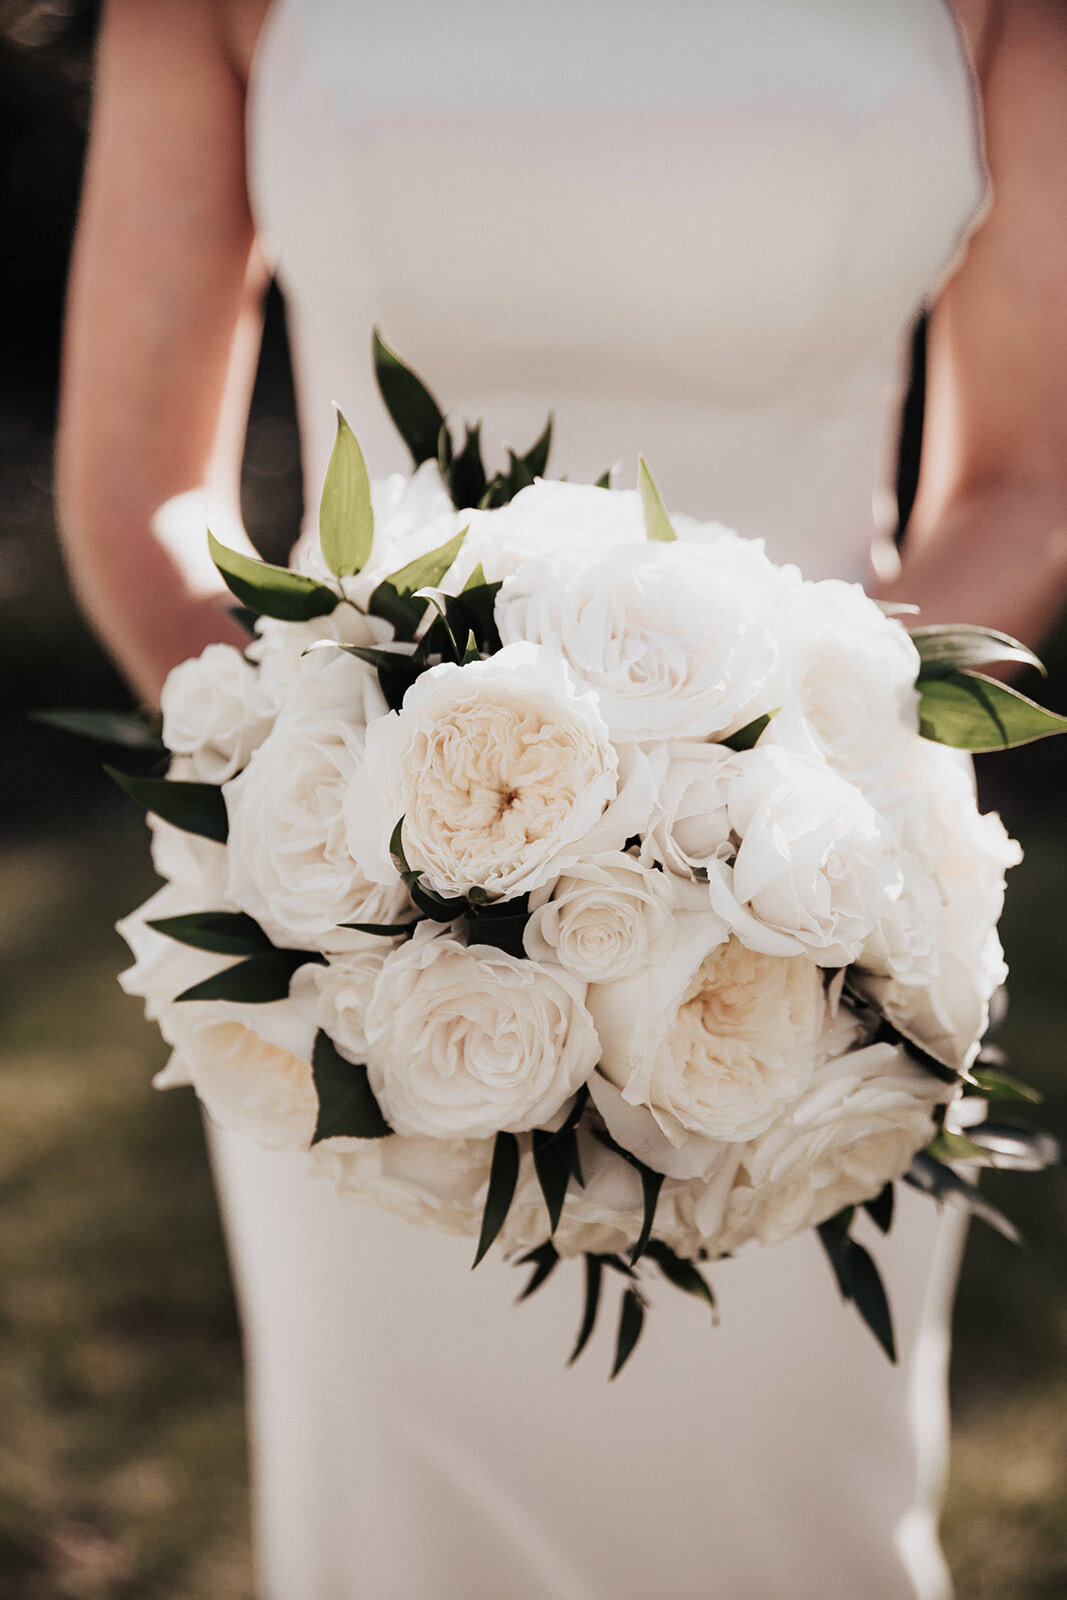 Bride showing bouquet with white roses